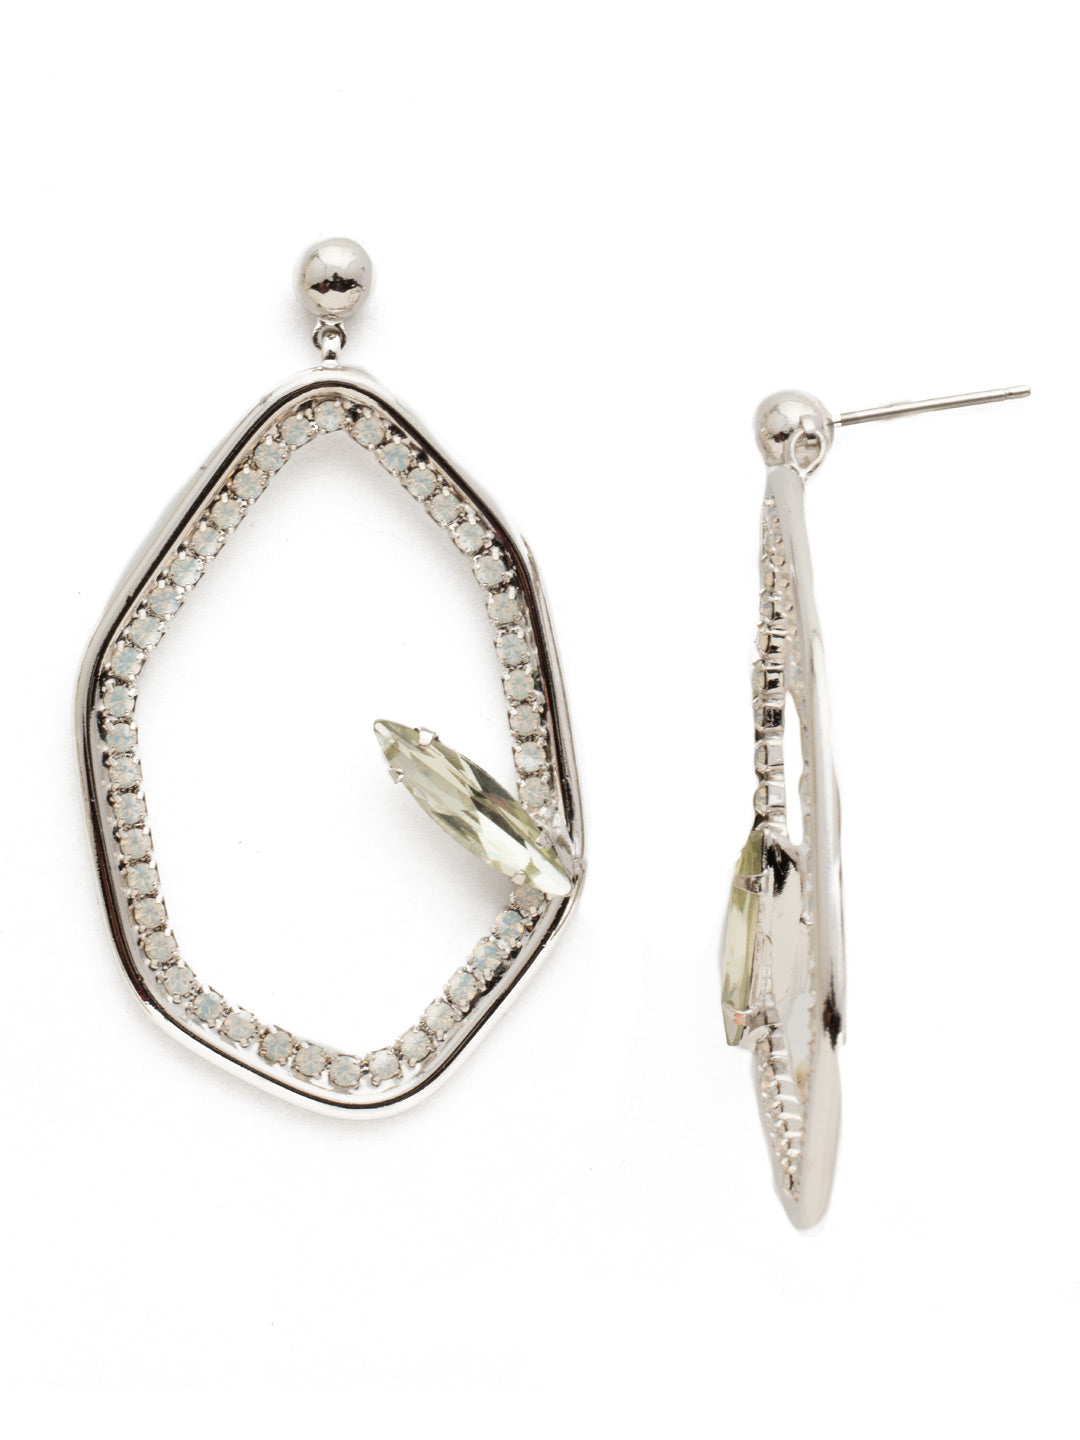 Gemma Dangle Earrings - EEH28RHSSU - <p>These posts are long on style. Fasten on the fun shape surrounded by sparkling crystal pieces and you're sure to be the center of attention. From Sorrelli's Seersucker collection in our Palladium Silver-tone finish.</p>